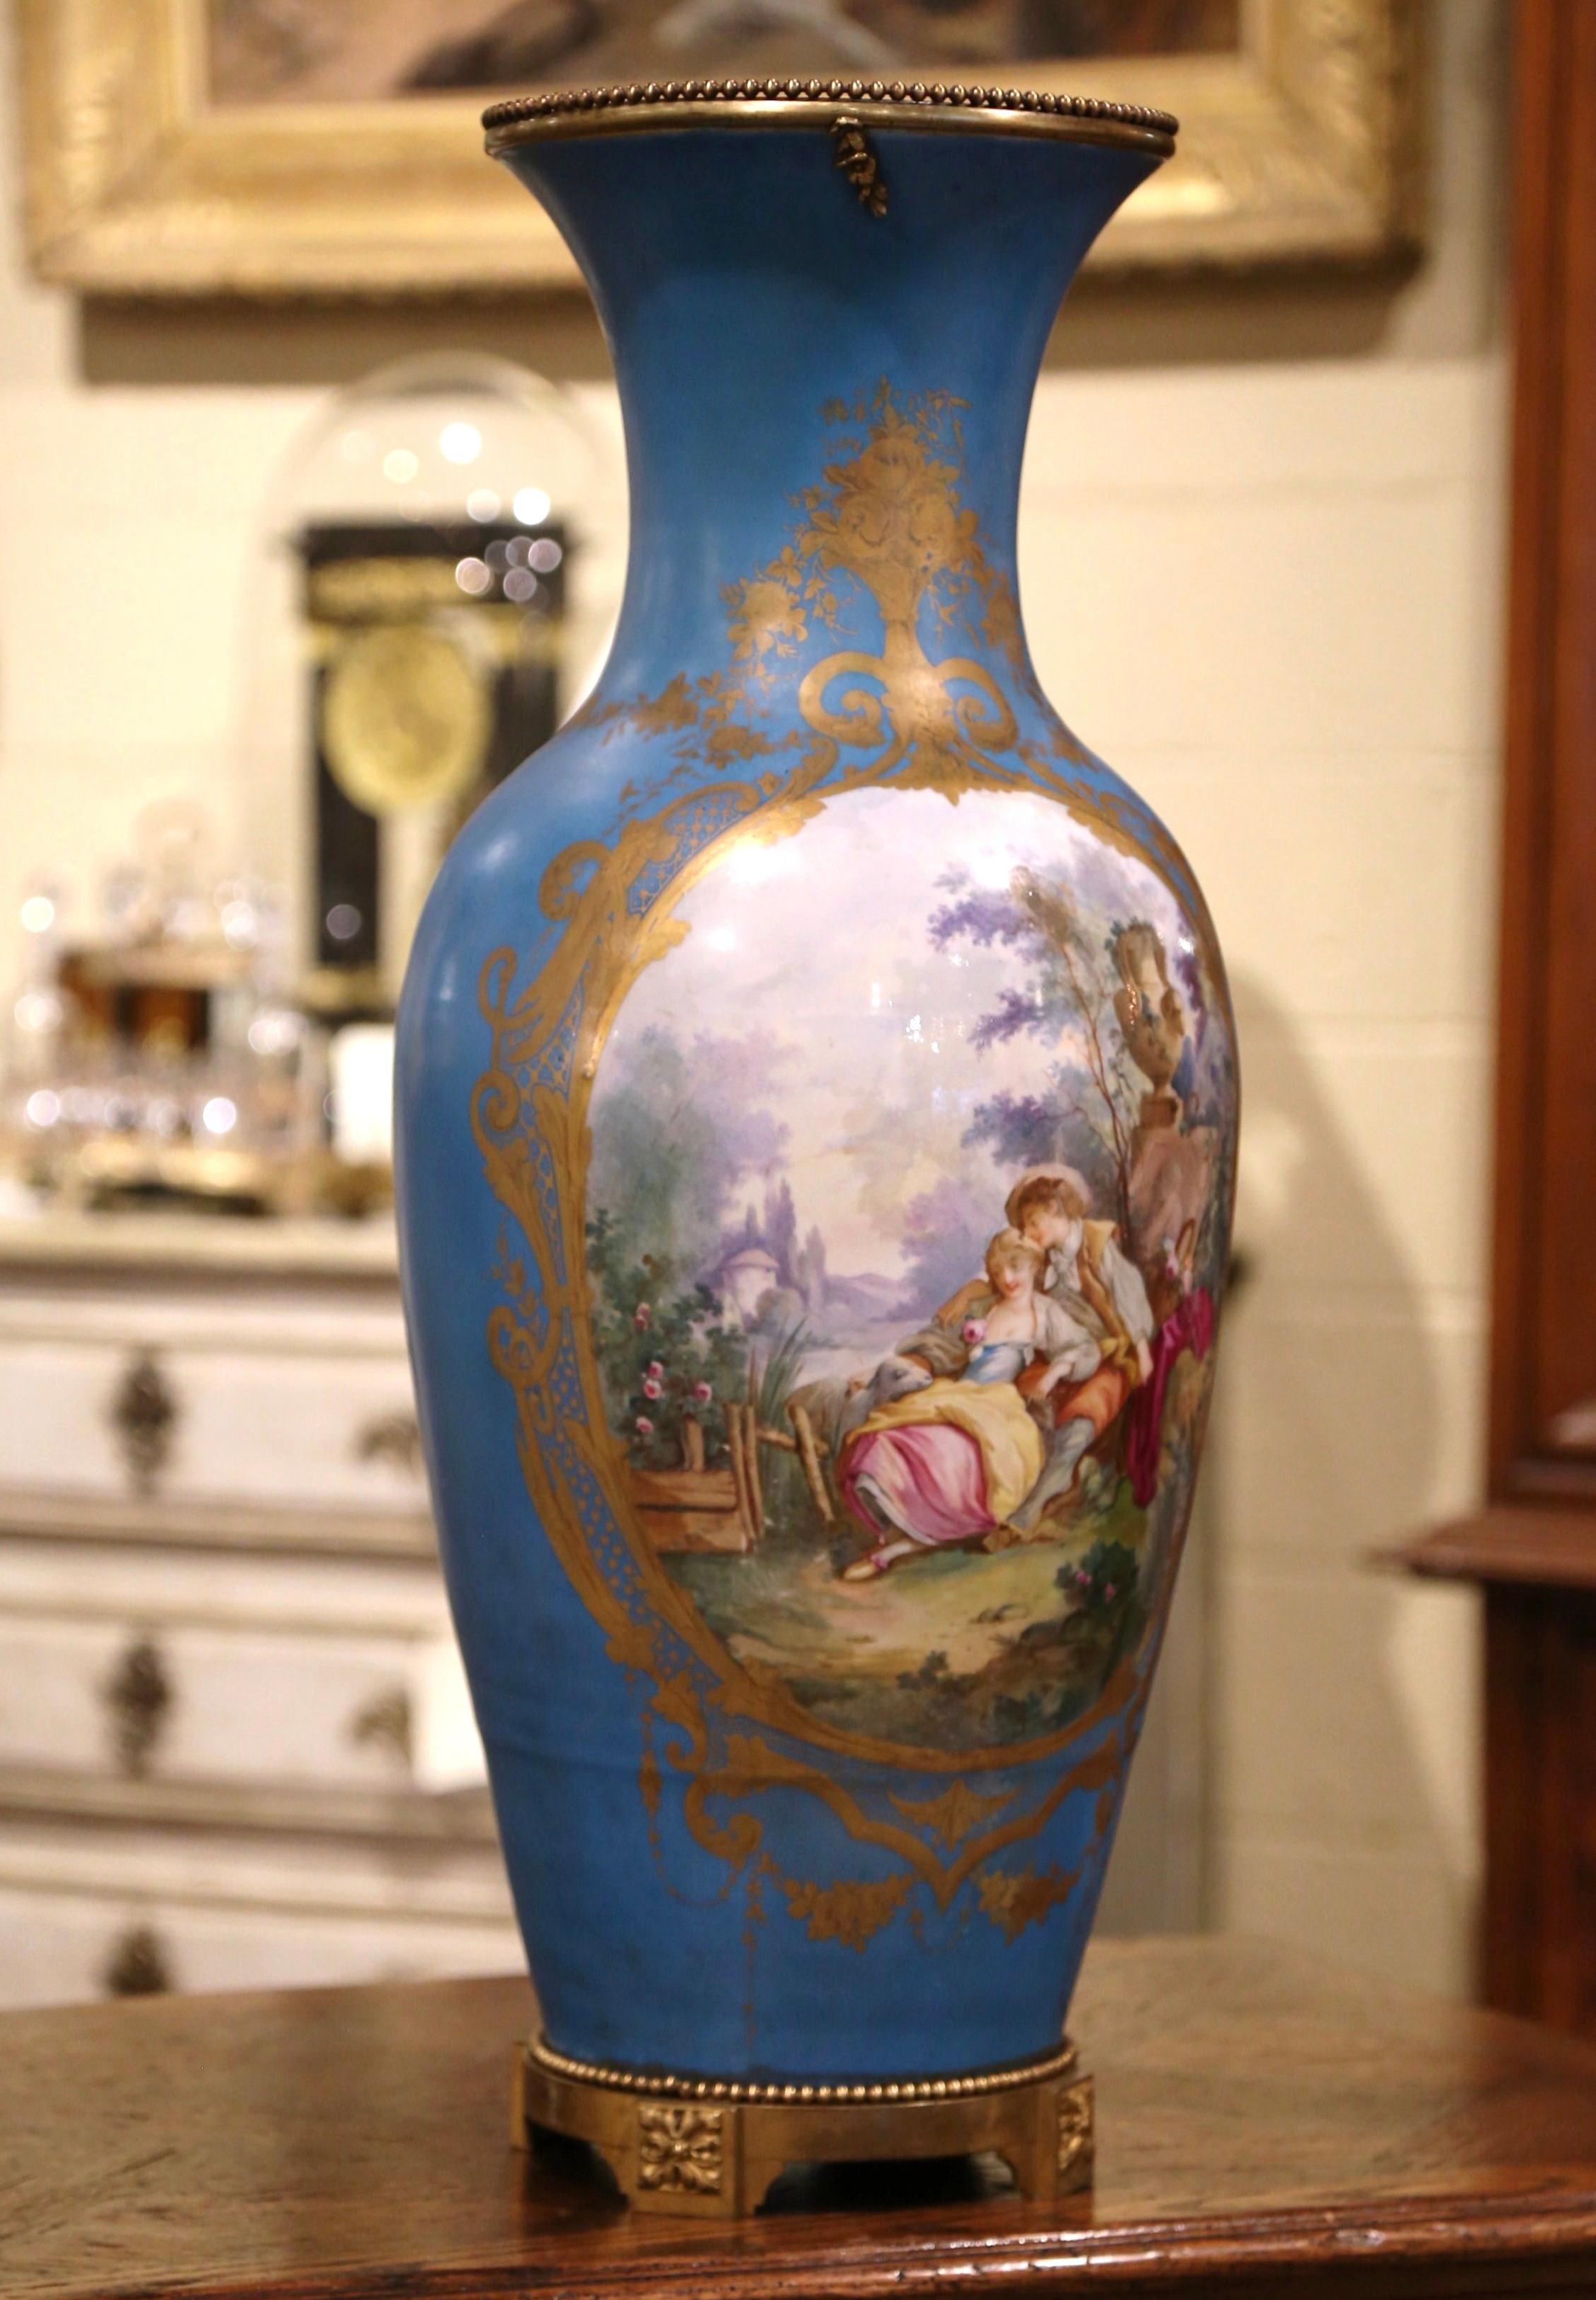 This monumental Louis XVI Sèvres vase was created in Paris, France, circa 1860. Standing on a bronze base, the tall porcelain vessel features a hand painted romantic scene in the manner of Boucher, with a gentleman courting a young beauty. The